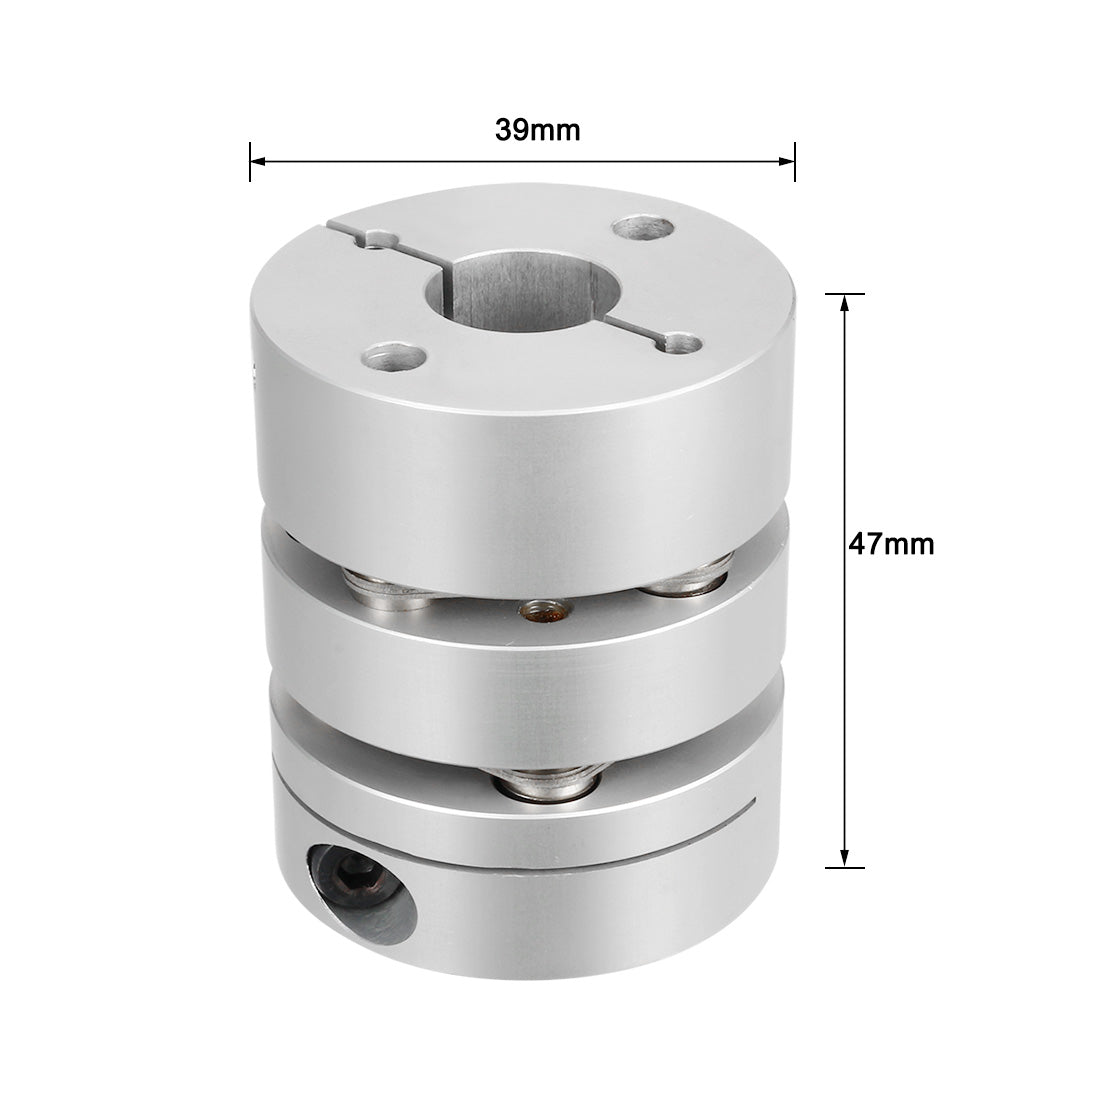 uxcell Uxcell 14mmx14mm Clamp Tight Motor Shaft 2 Diaphragm Coupling accoupler